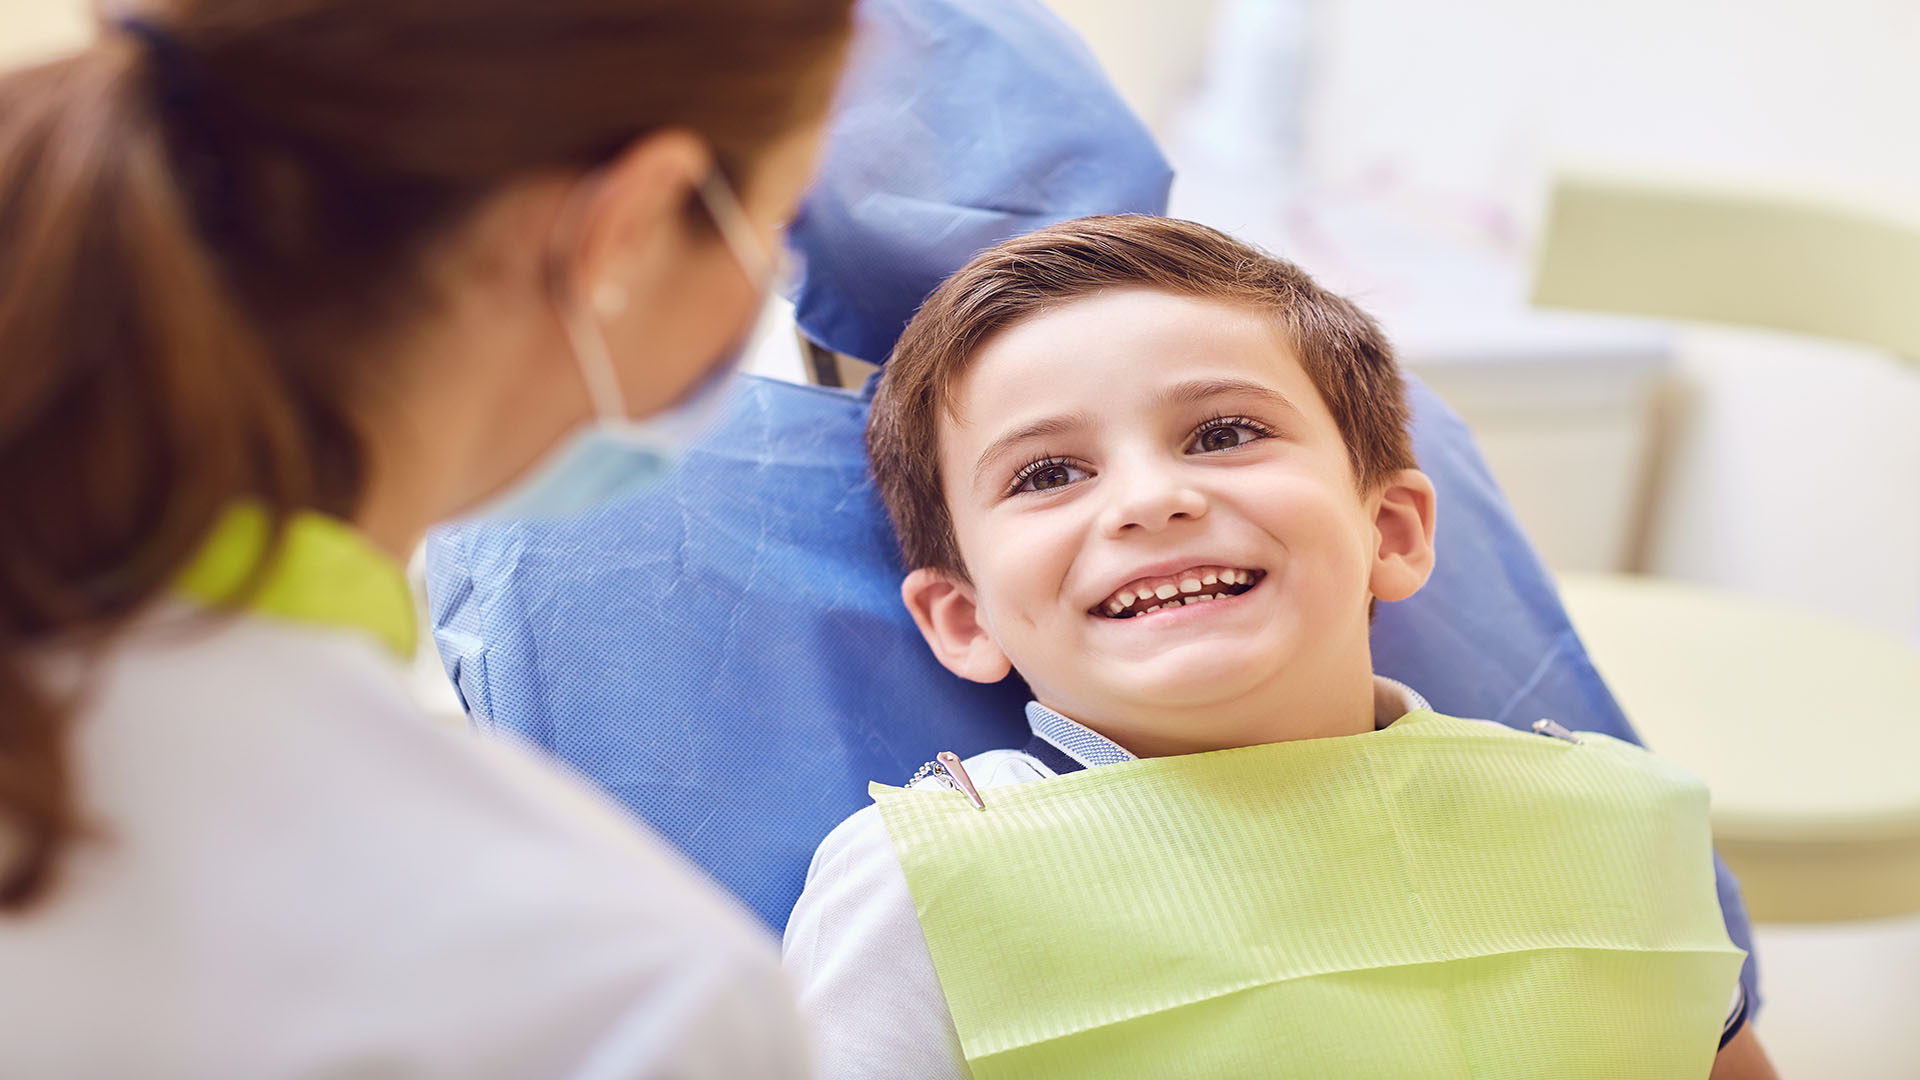 Young boy excitedly looking at dentist during an appointment.